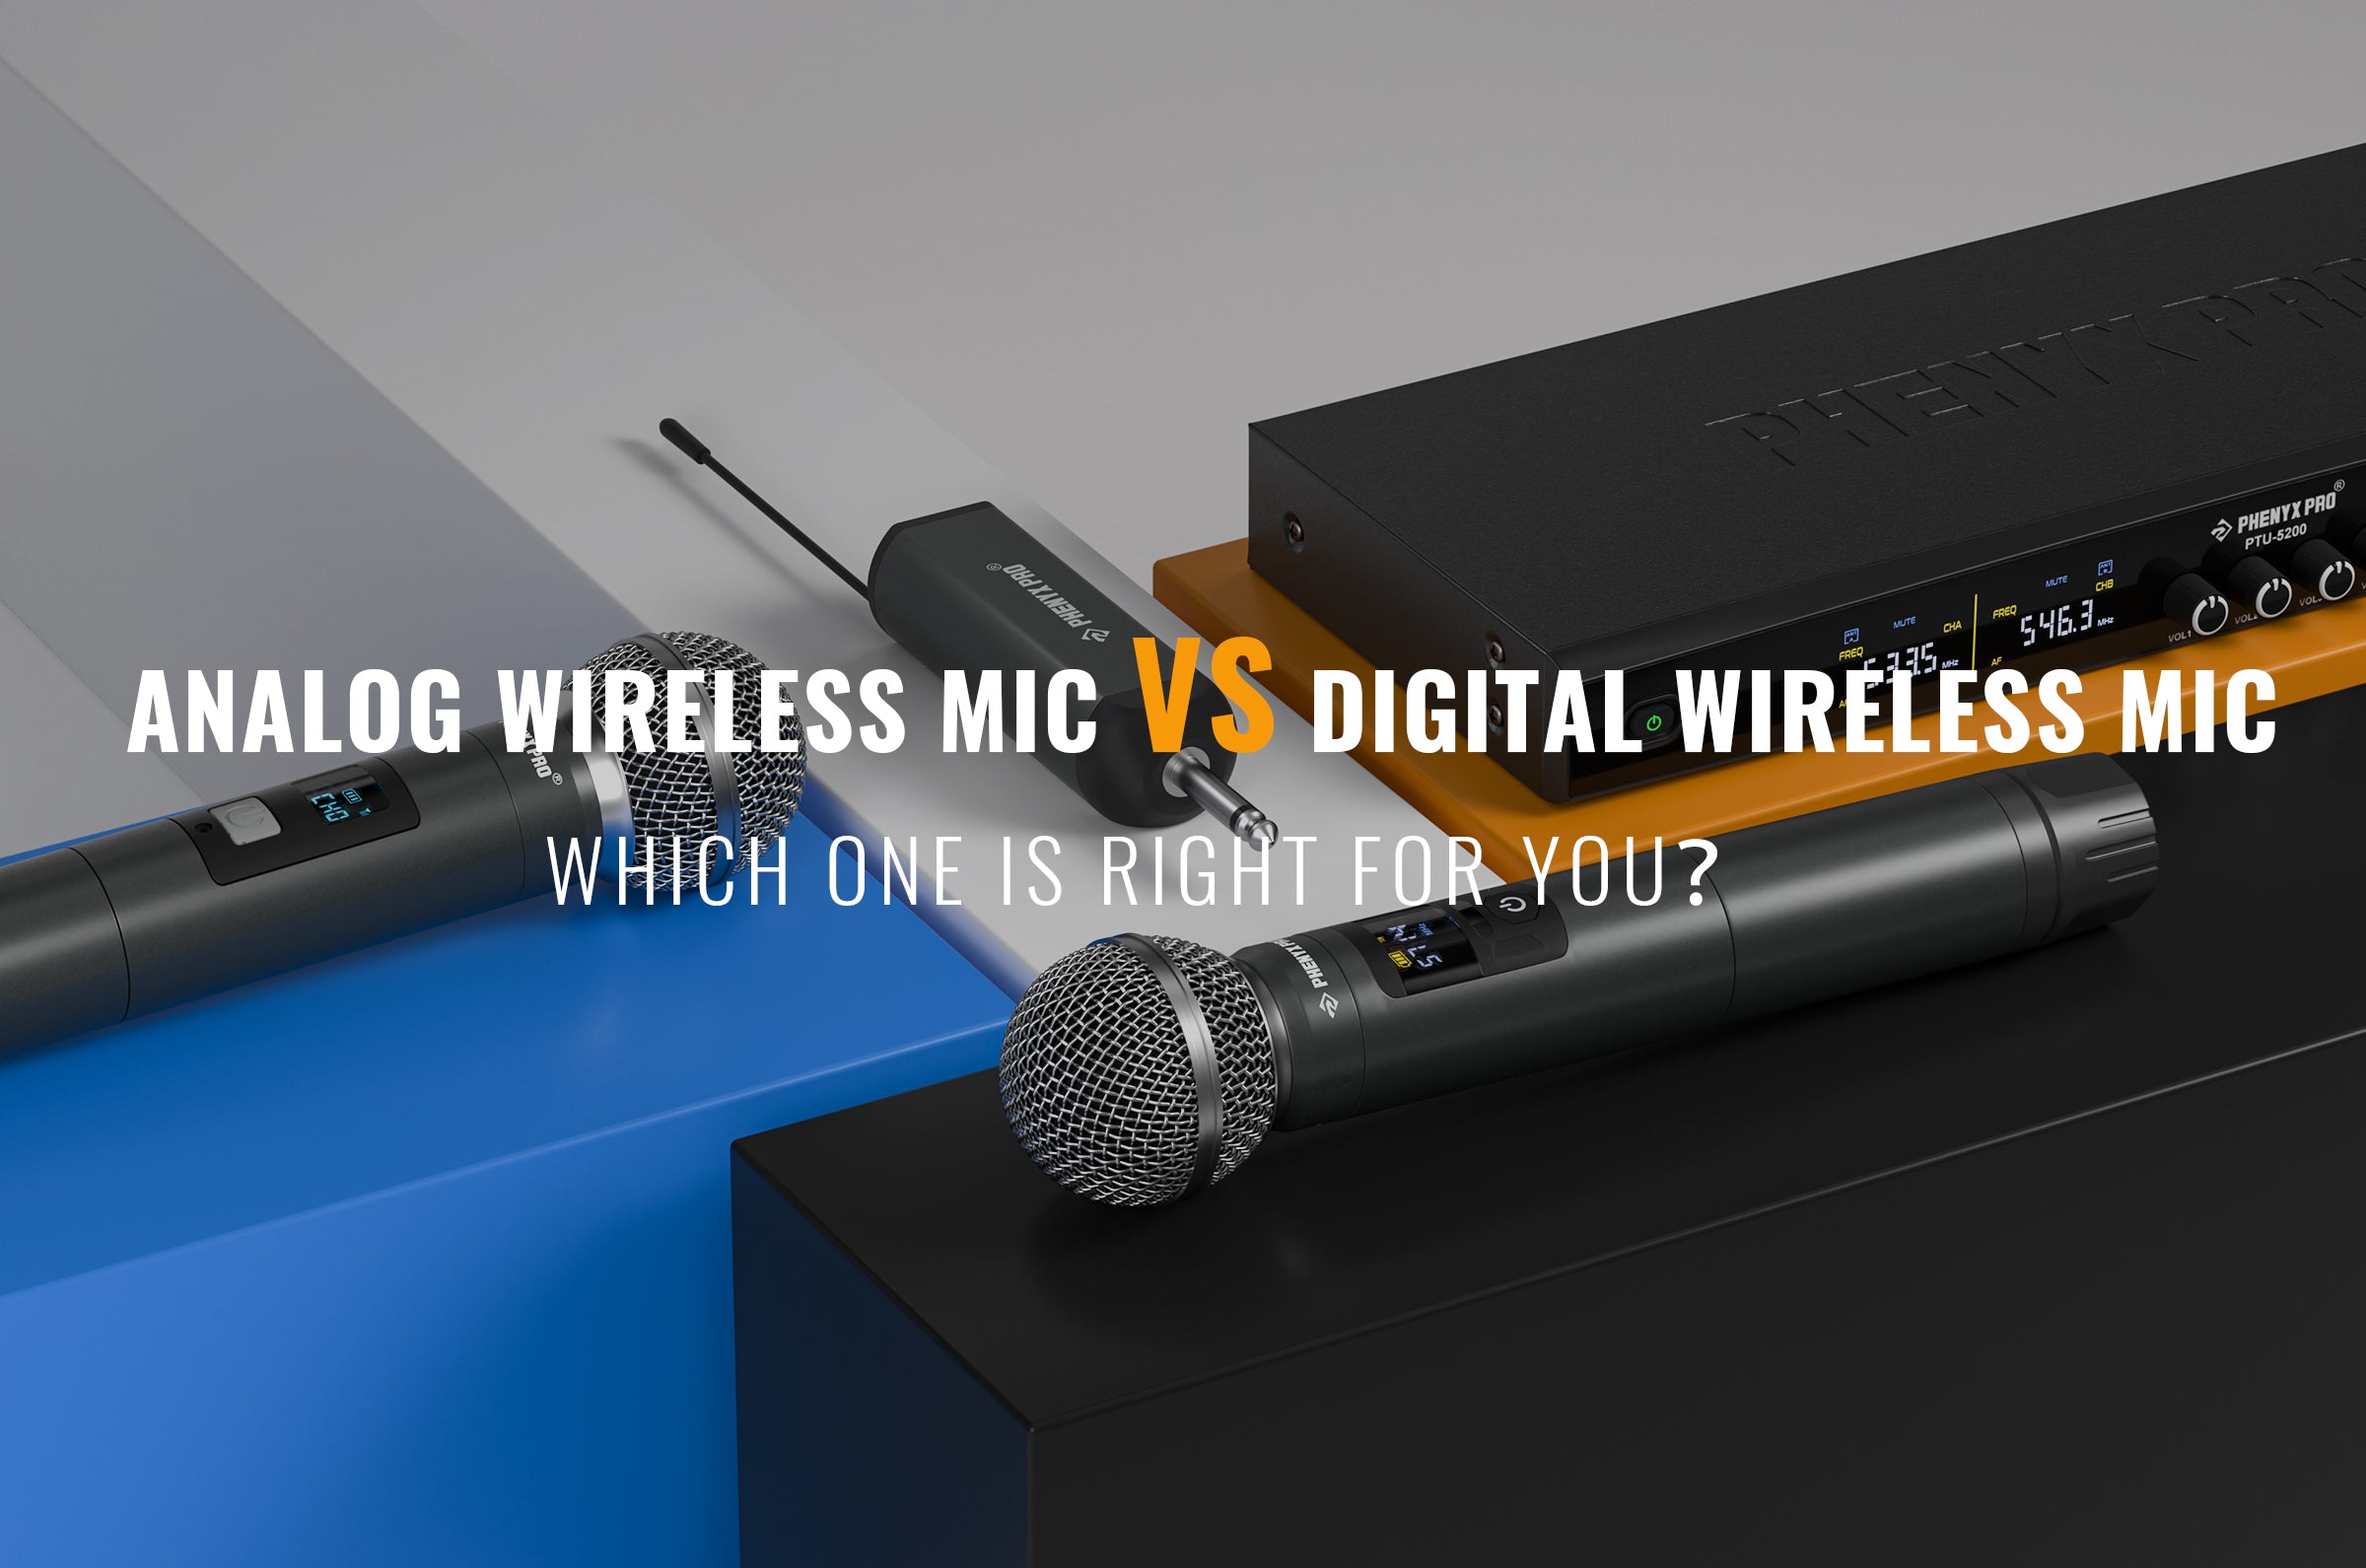 Analog Wireless Mic vs. Digital Wireless Mic: Which One is Right for You?